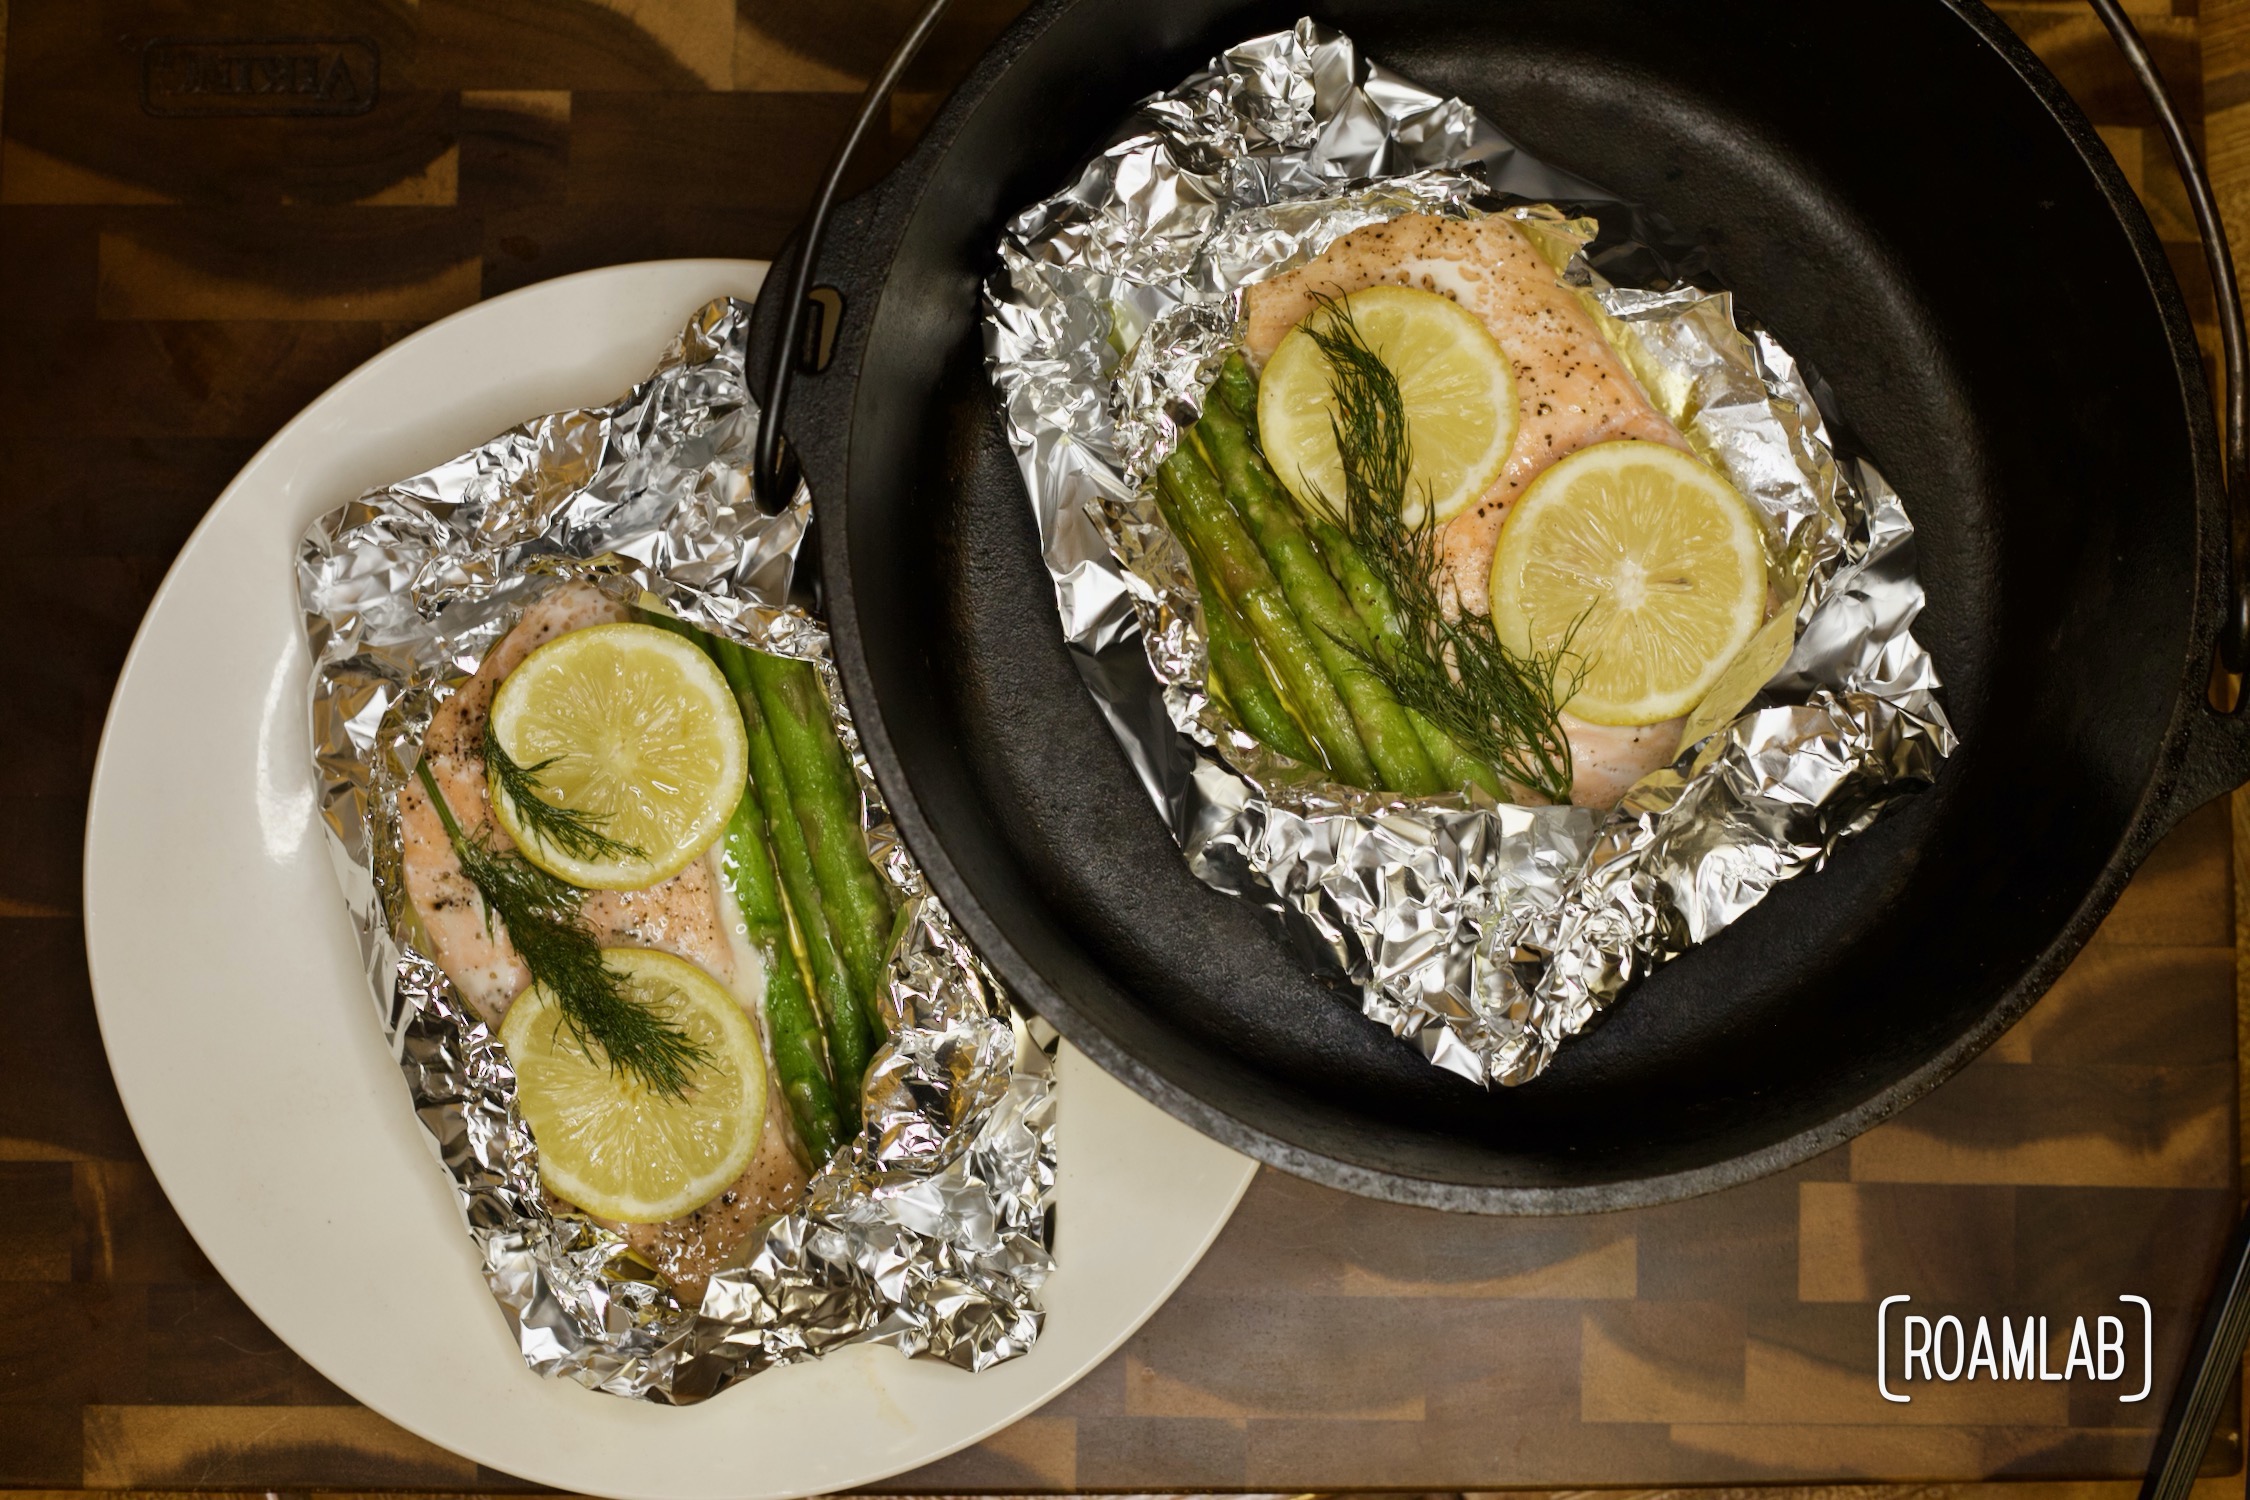 Enjoy this simple seafood course with our tin foil salmon campfire cooking dinner recipe. Add veggies with the fillet to make a full meal in one packet.